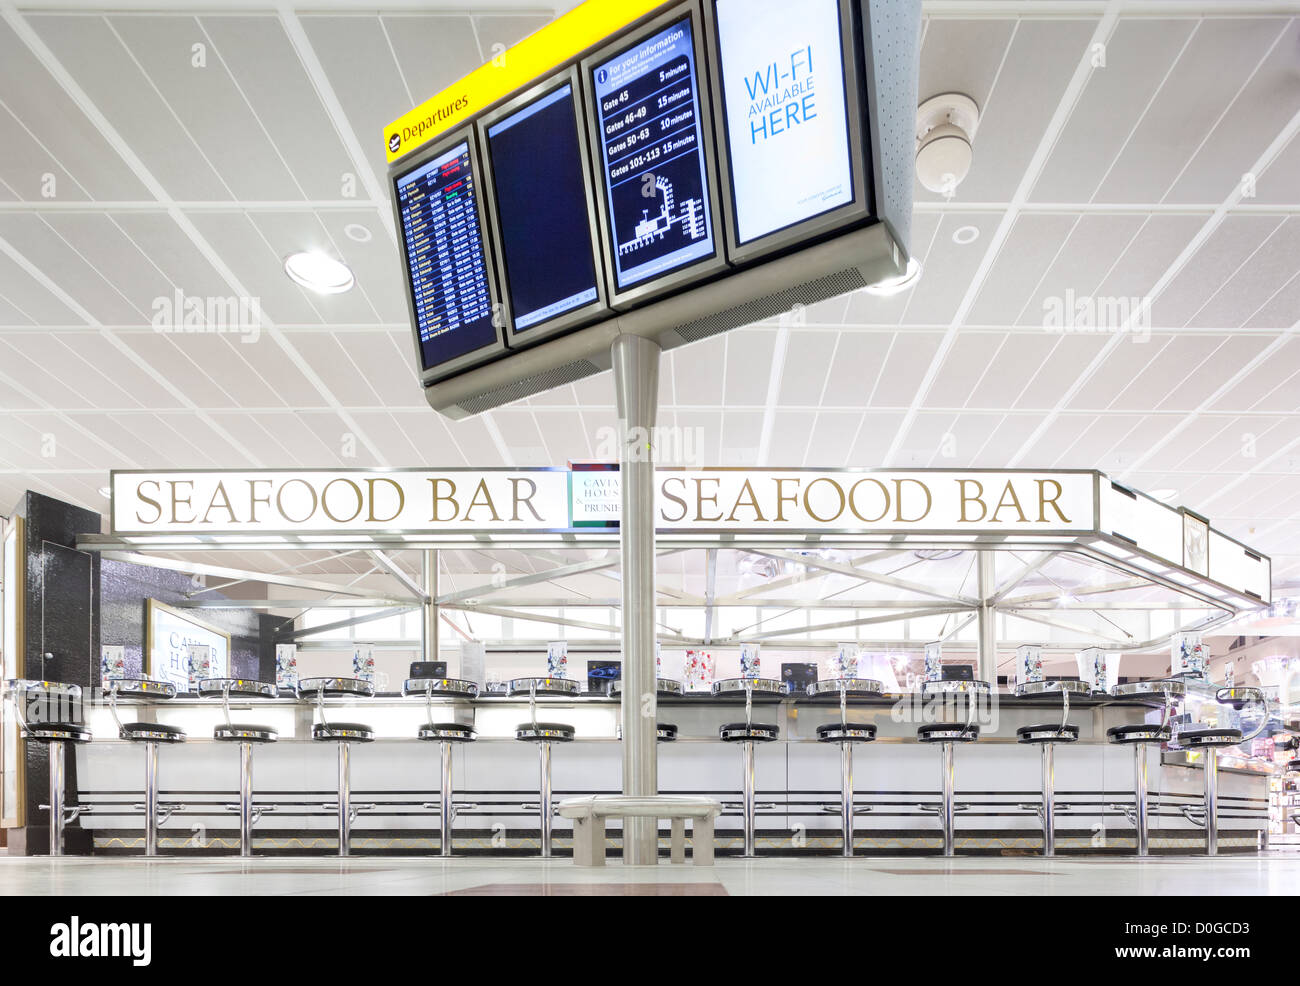 Gatwick Departure Lounge North Terminal Caviar House & Prunier Seafood Bar with departures display and Wifi Wi-Fi available sign Stock Photo